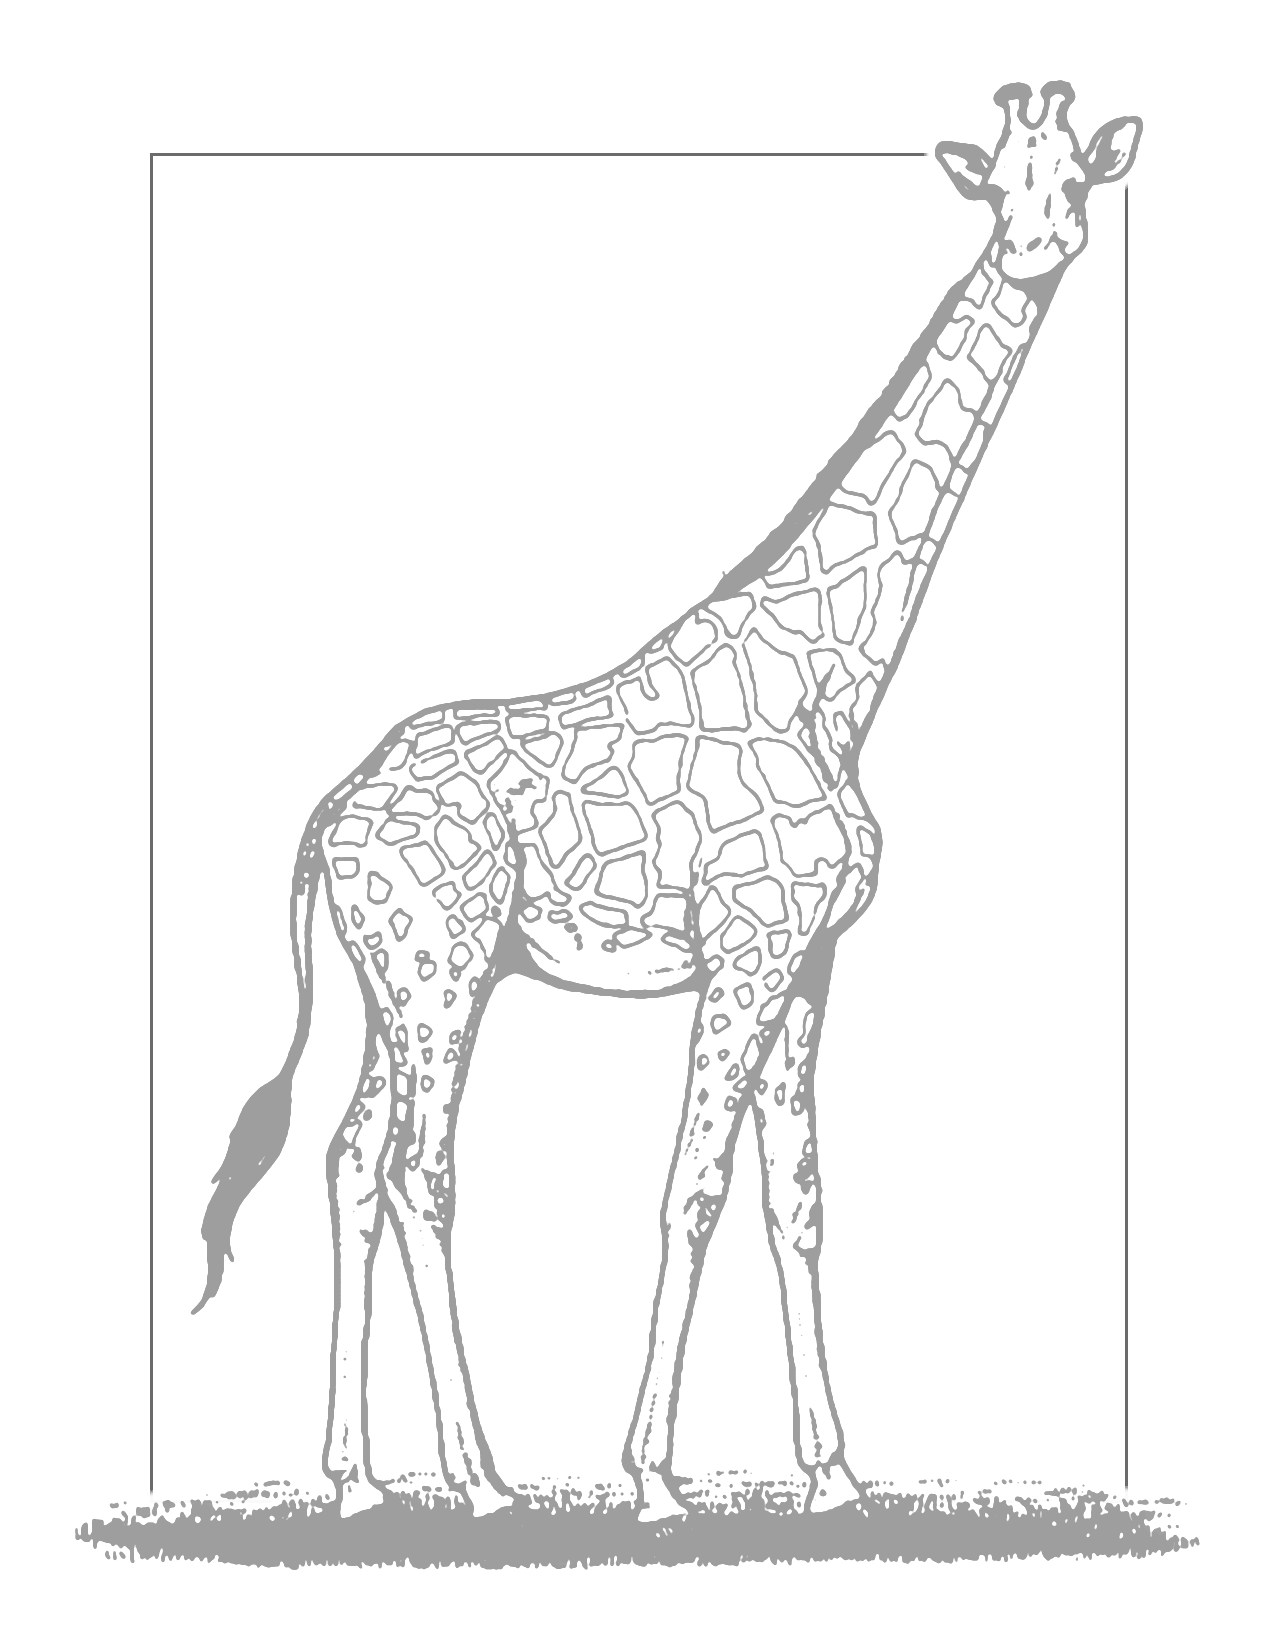 Traceable Giraffe Coloring Page